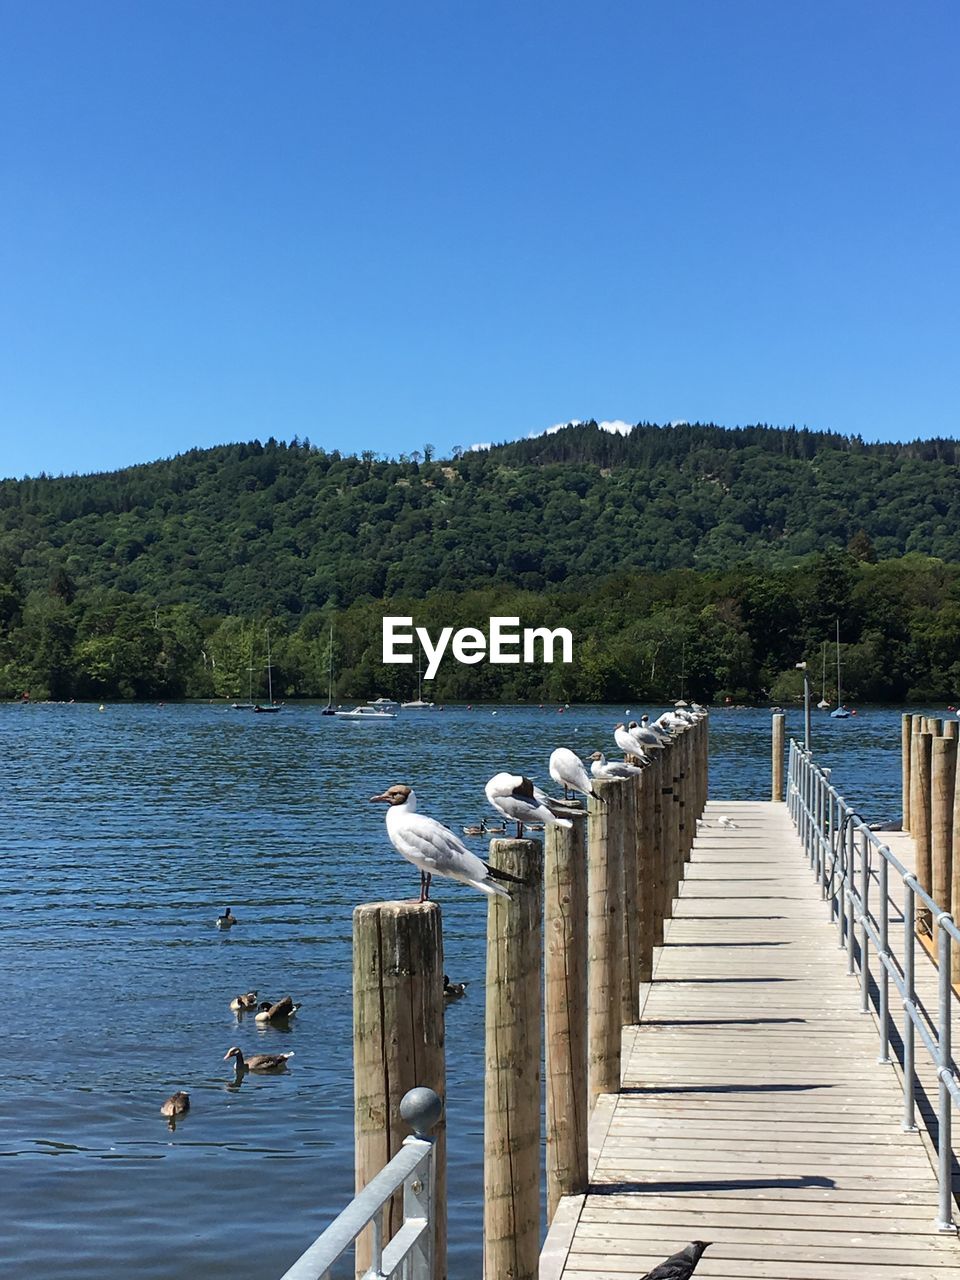 VIEW OF SEAGULLS ON LAKE